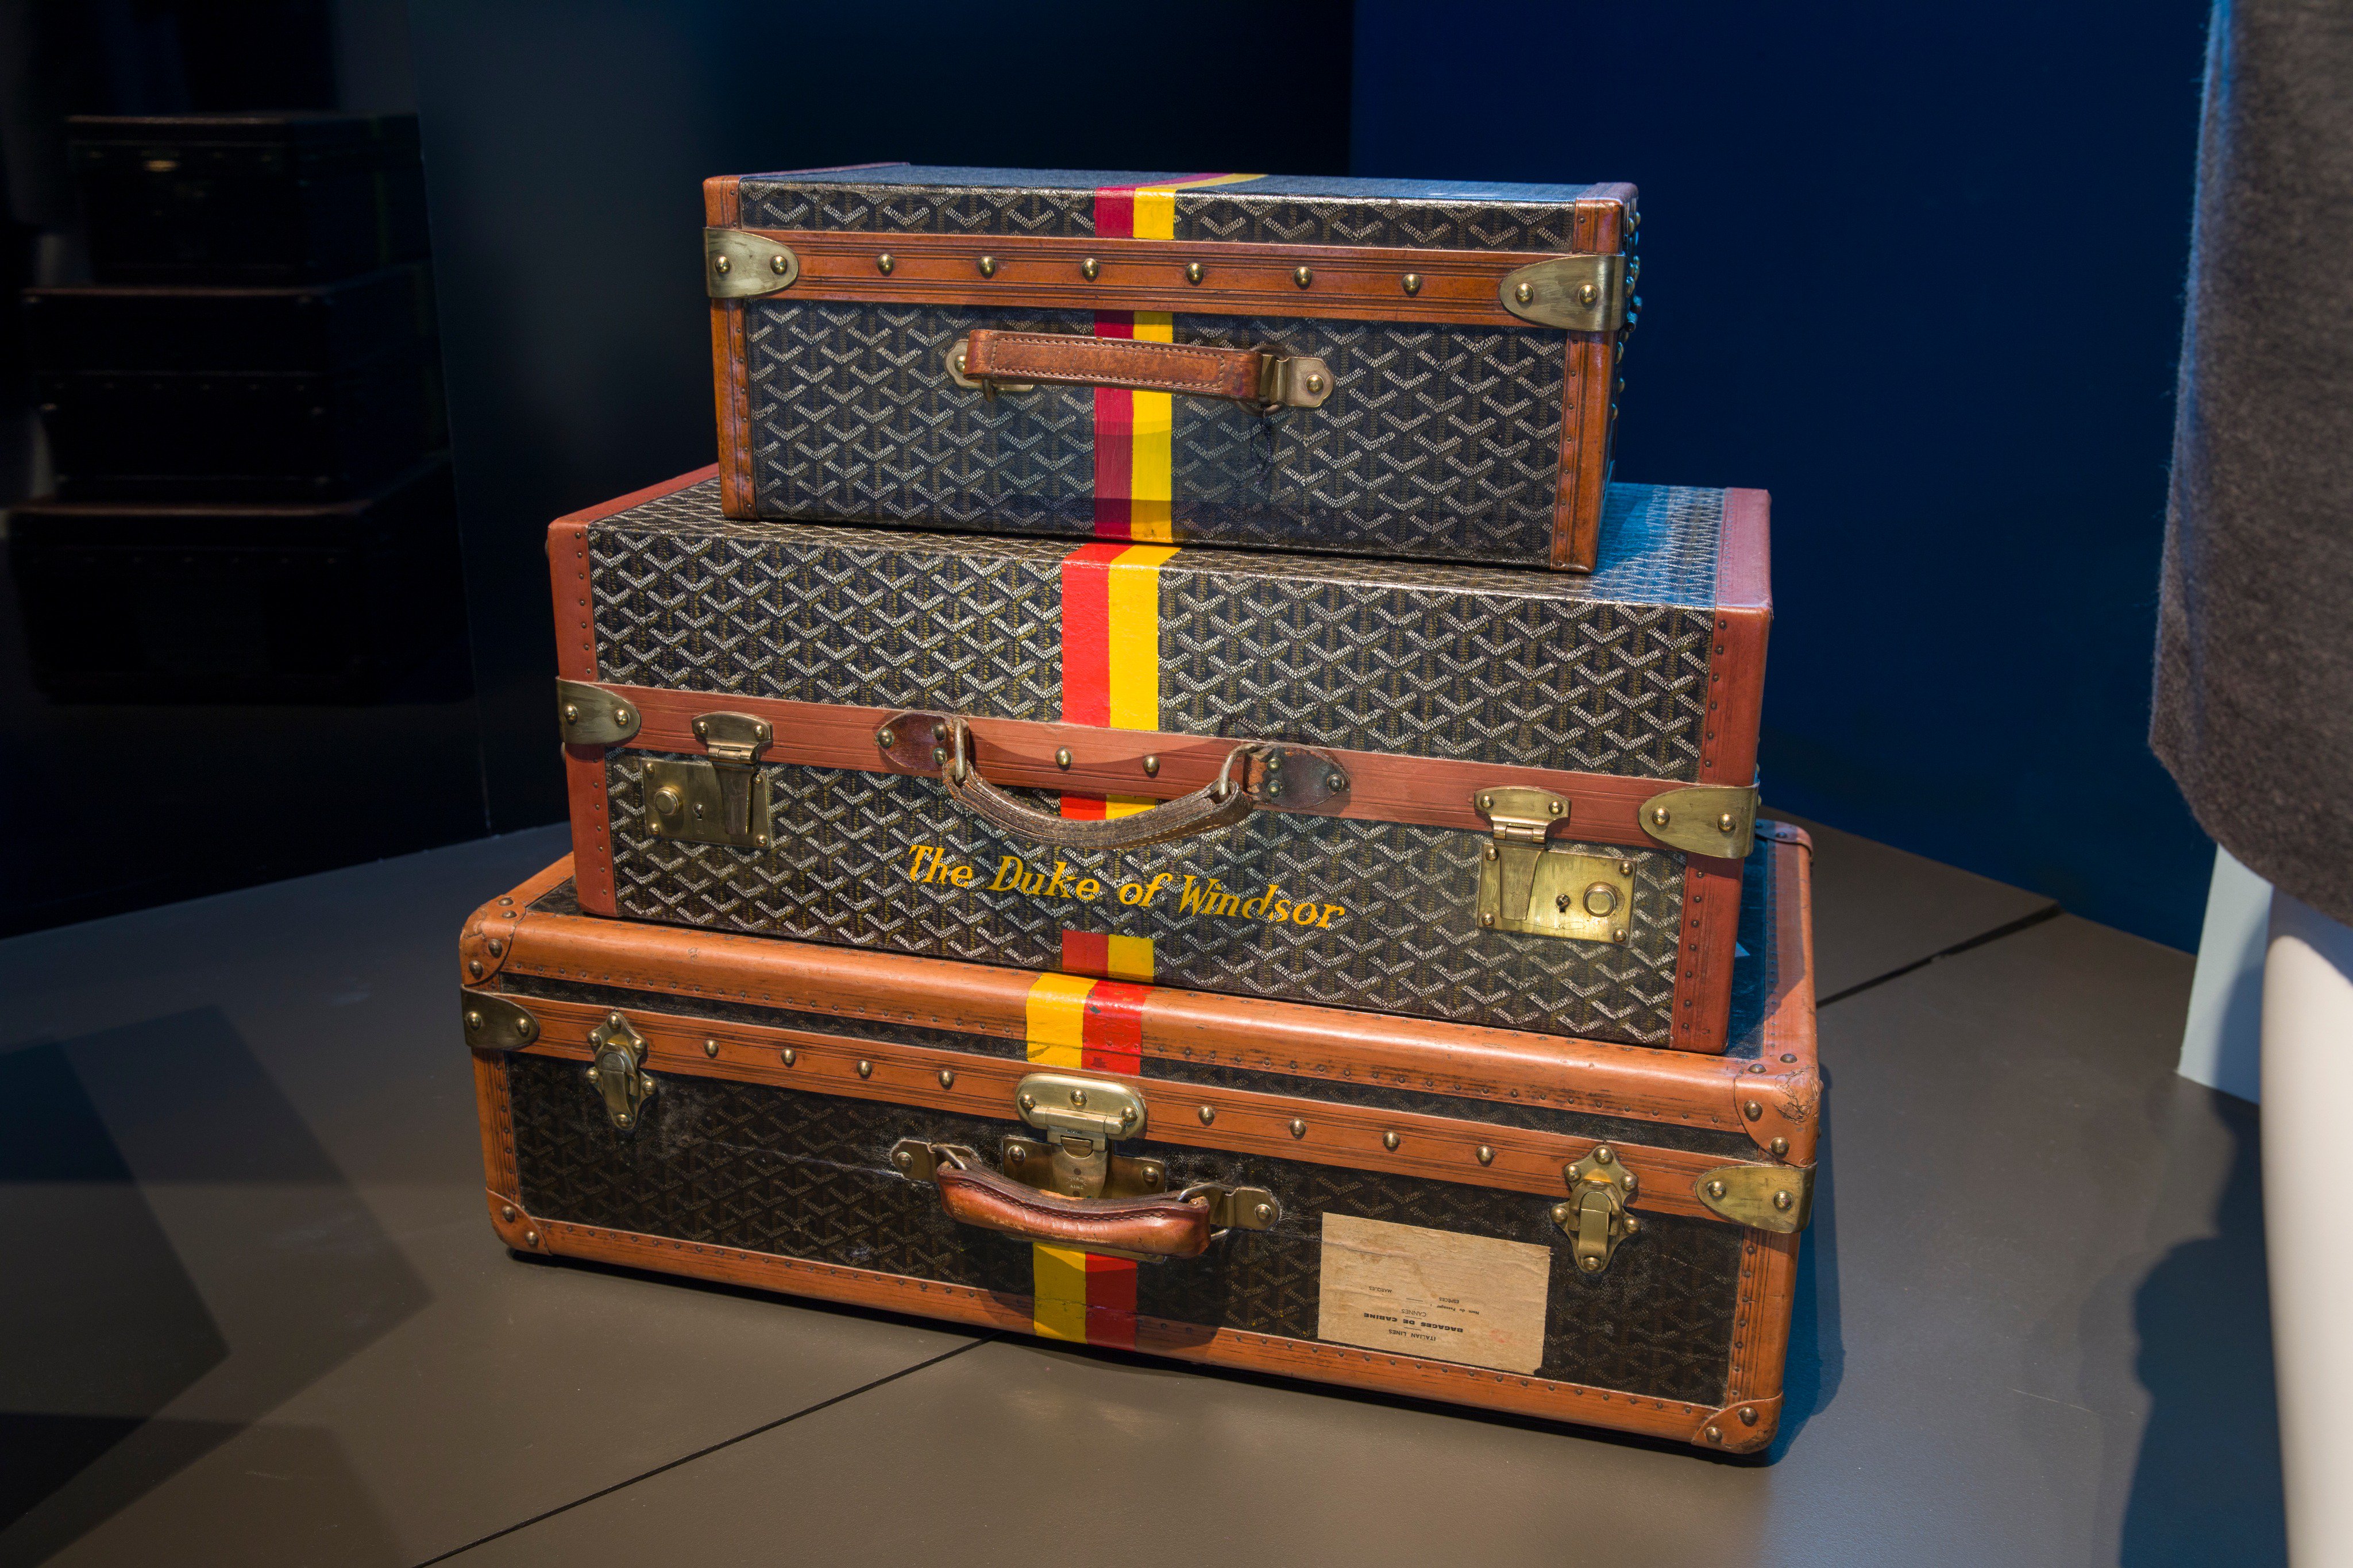 V&A on X: After King Edward VIII abdicated to marry Wallis Simpson, the  couple frequently travelled on liners. They each owned a set of  personalised luggage from the exclusive @Goyard and travelled